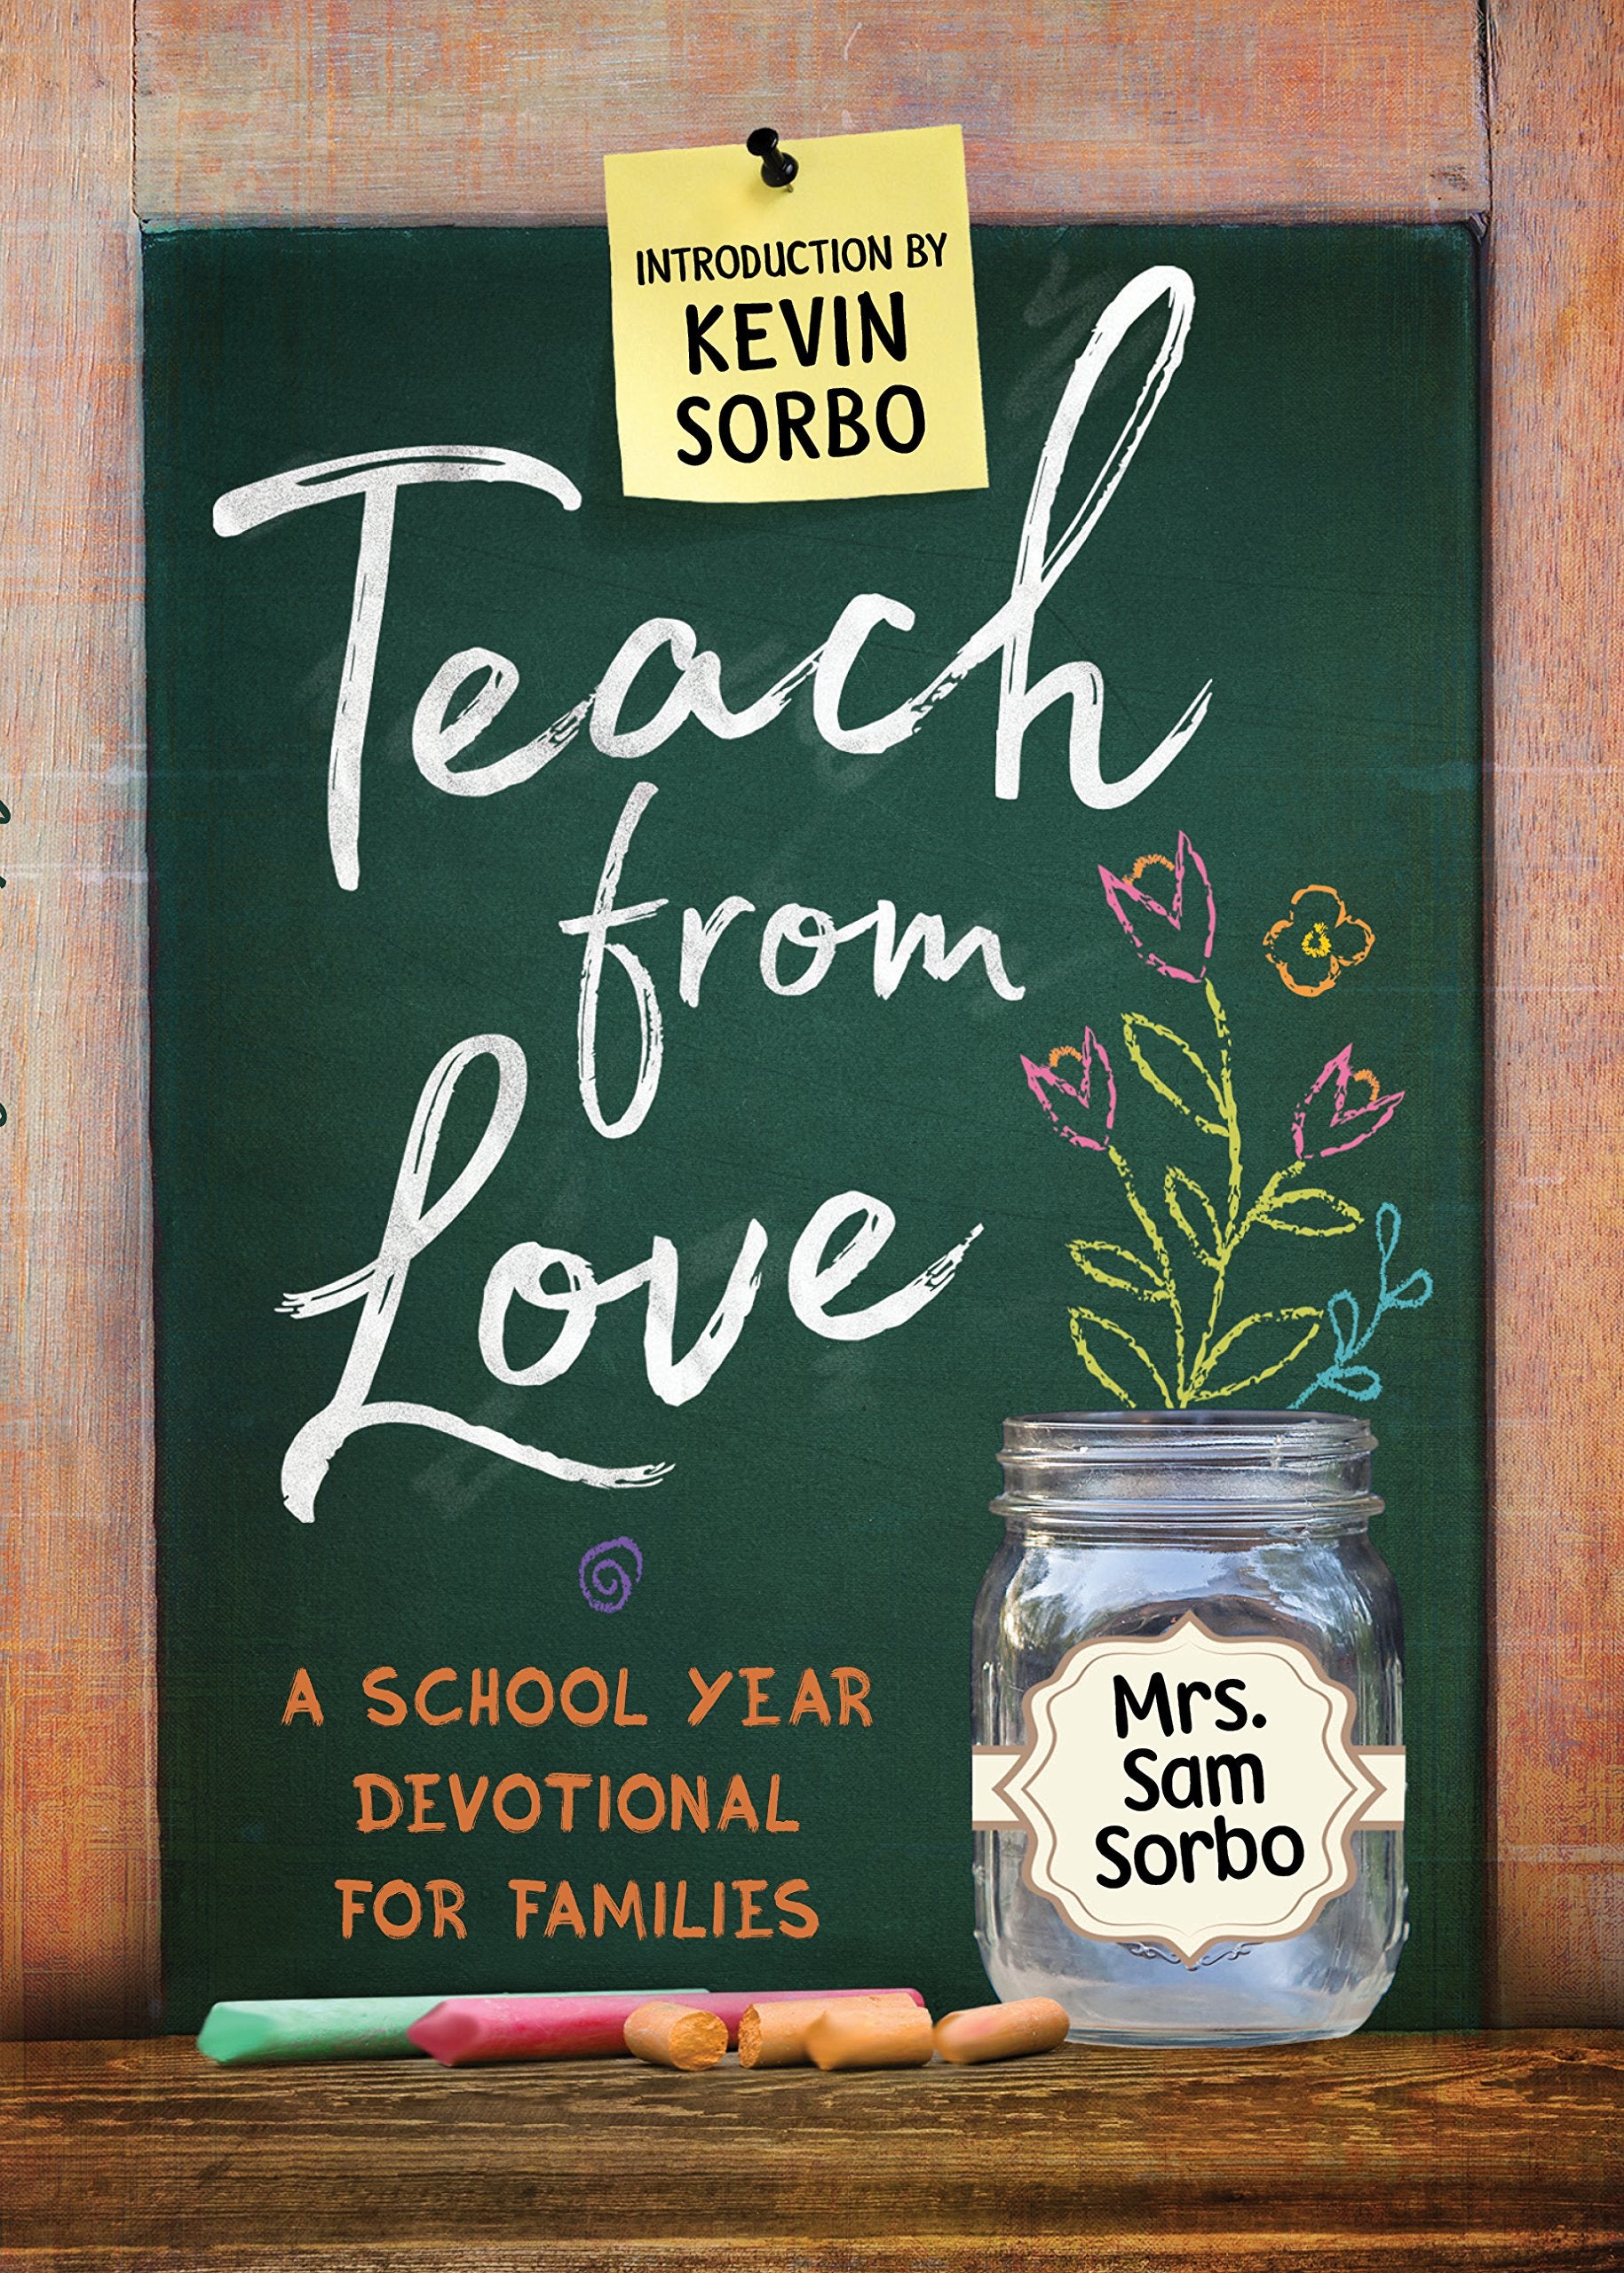 Teach from Love (A School Year Devotional for Families) (5368615174304)